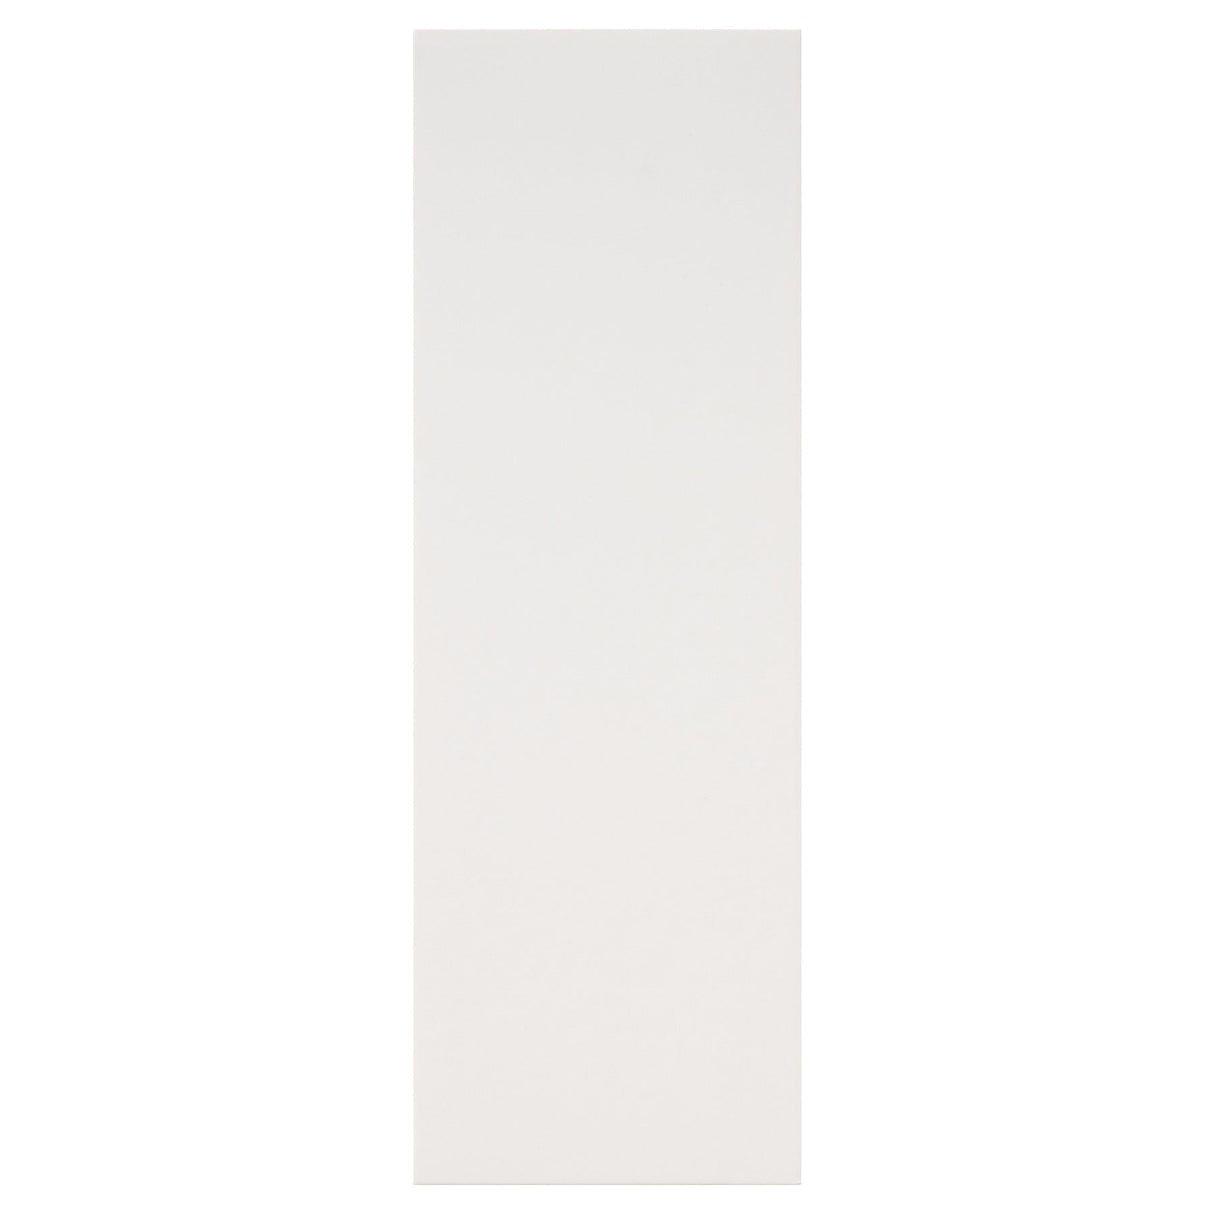 Concept 12x4 White Card - Pack of 50-Craft Paper & Card-Concept|StationeryShop.co.uk